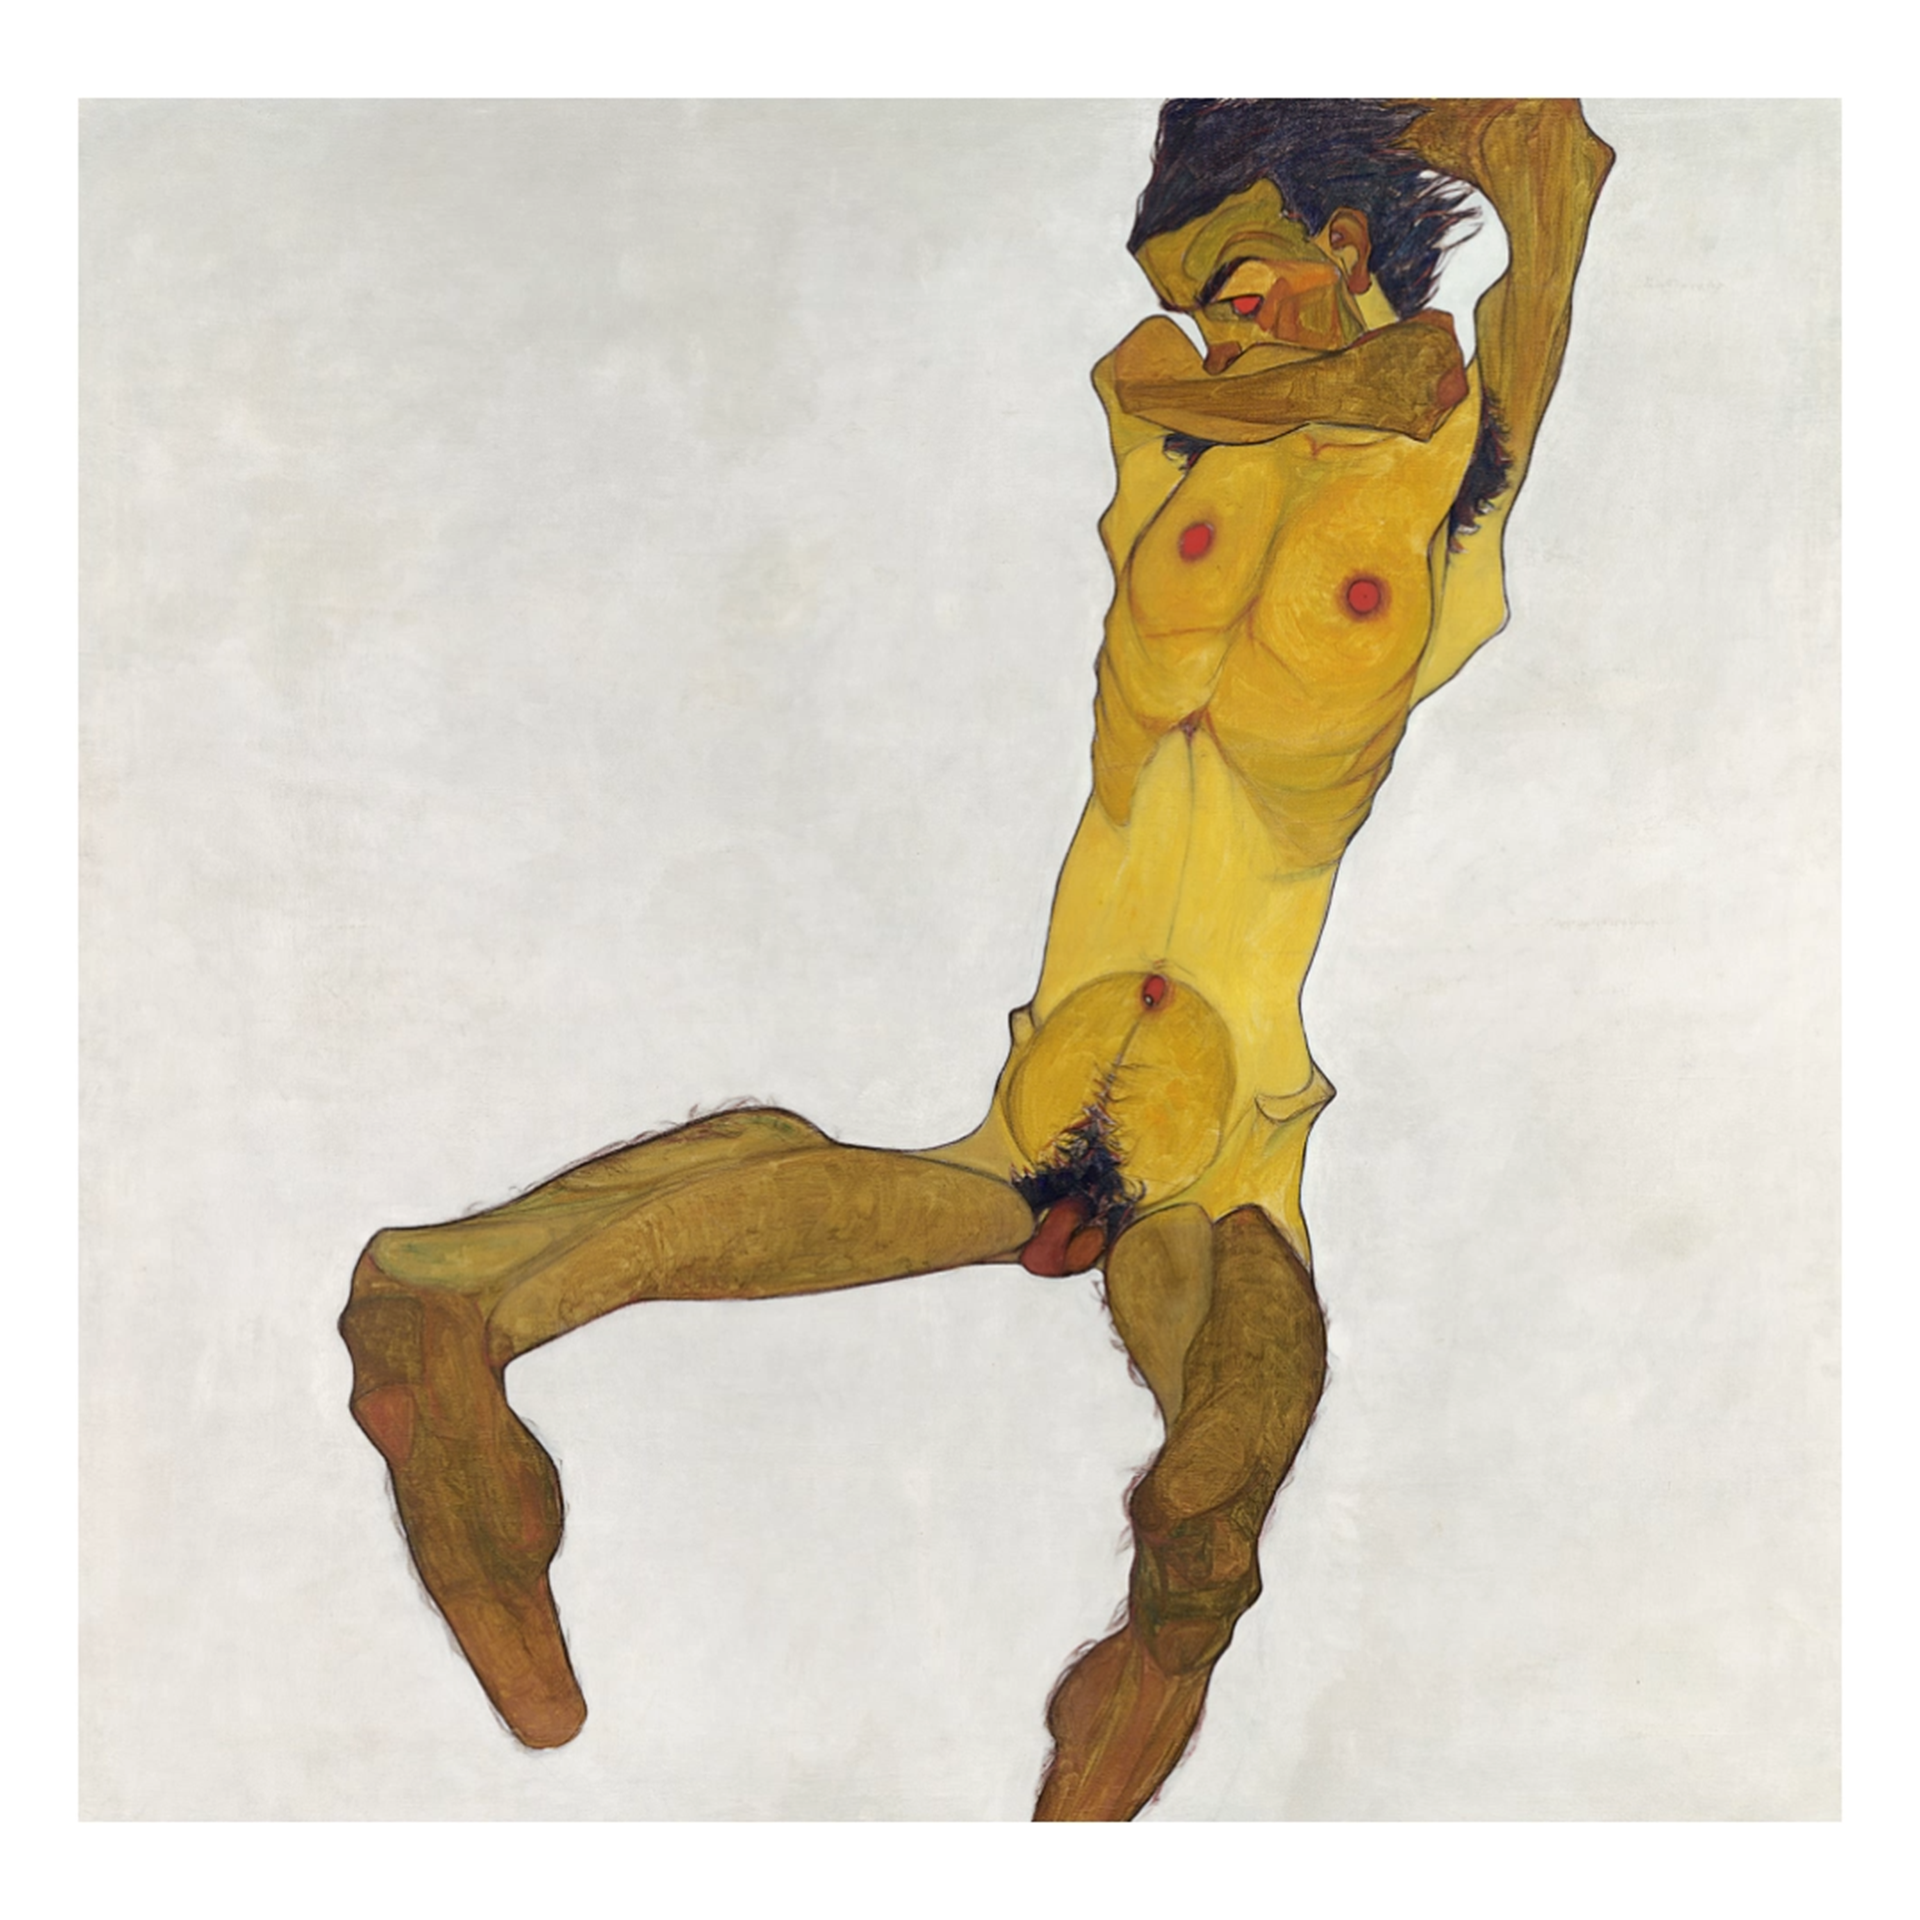 Image of the painting "Sitting Male Nude" by Egon Schiele censored on social media for being pronographic in content